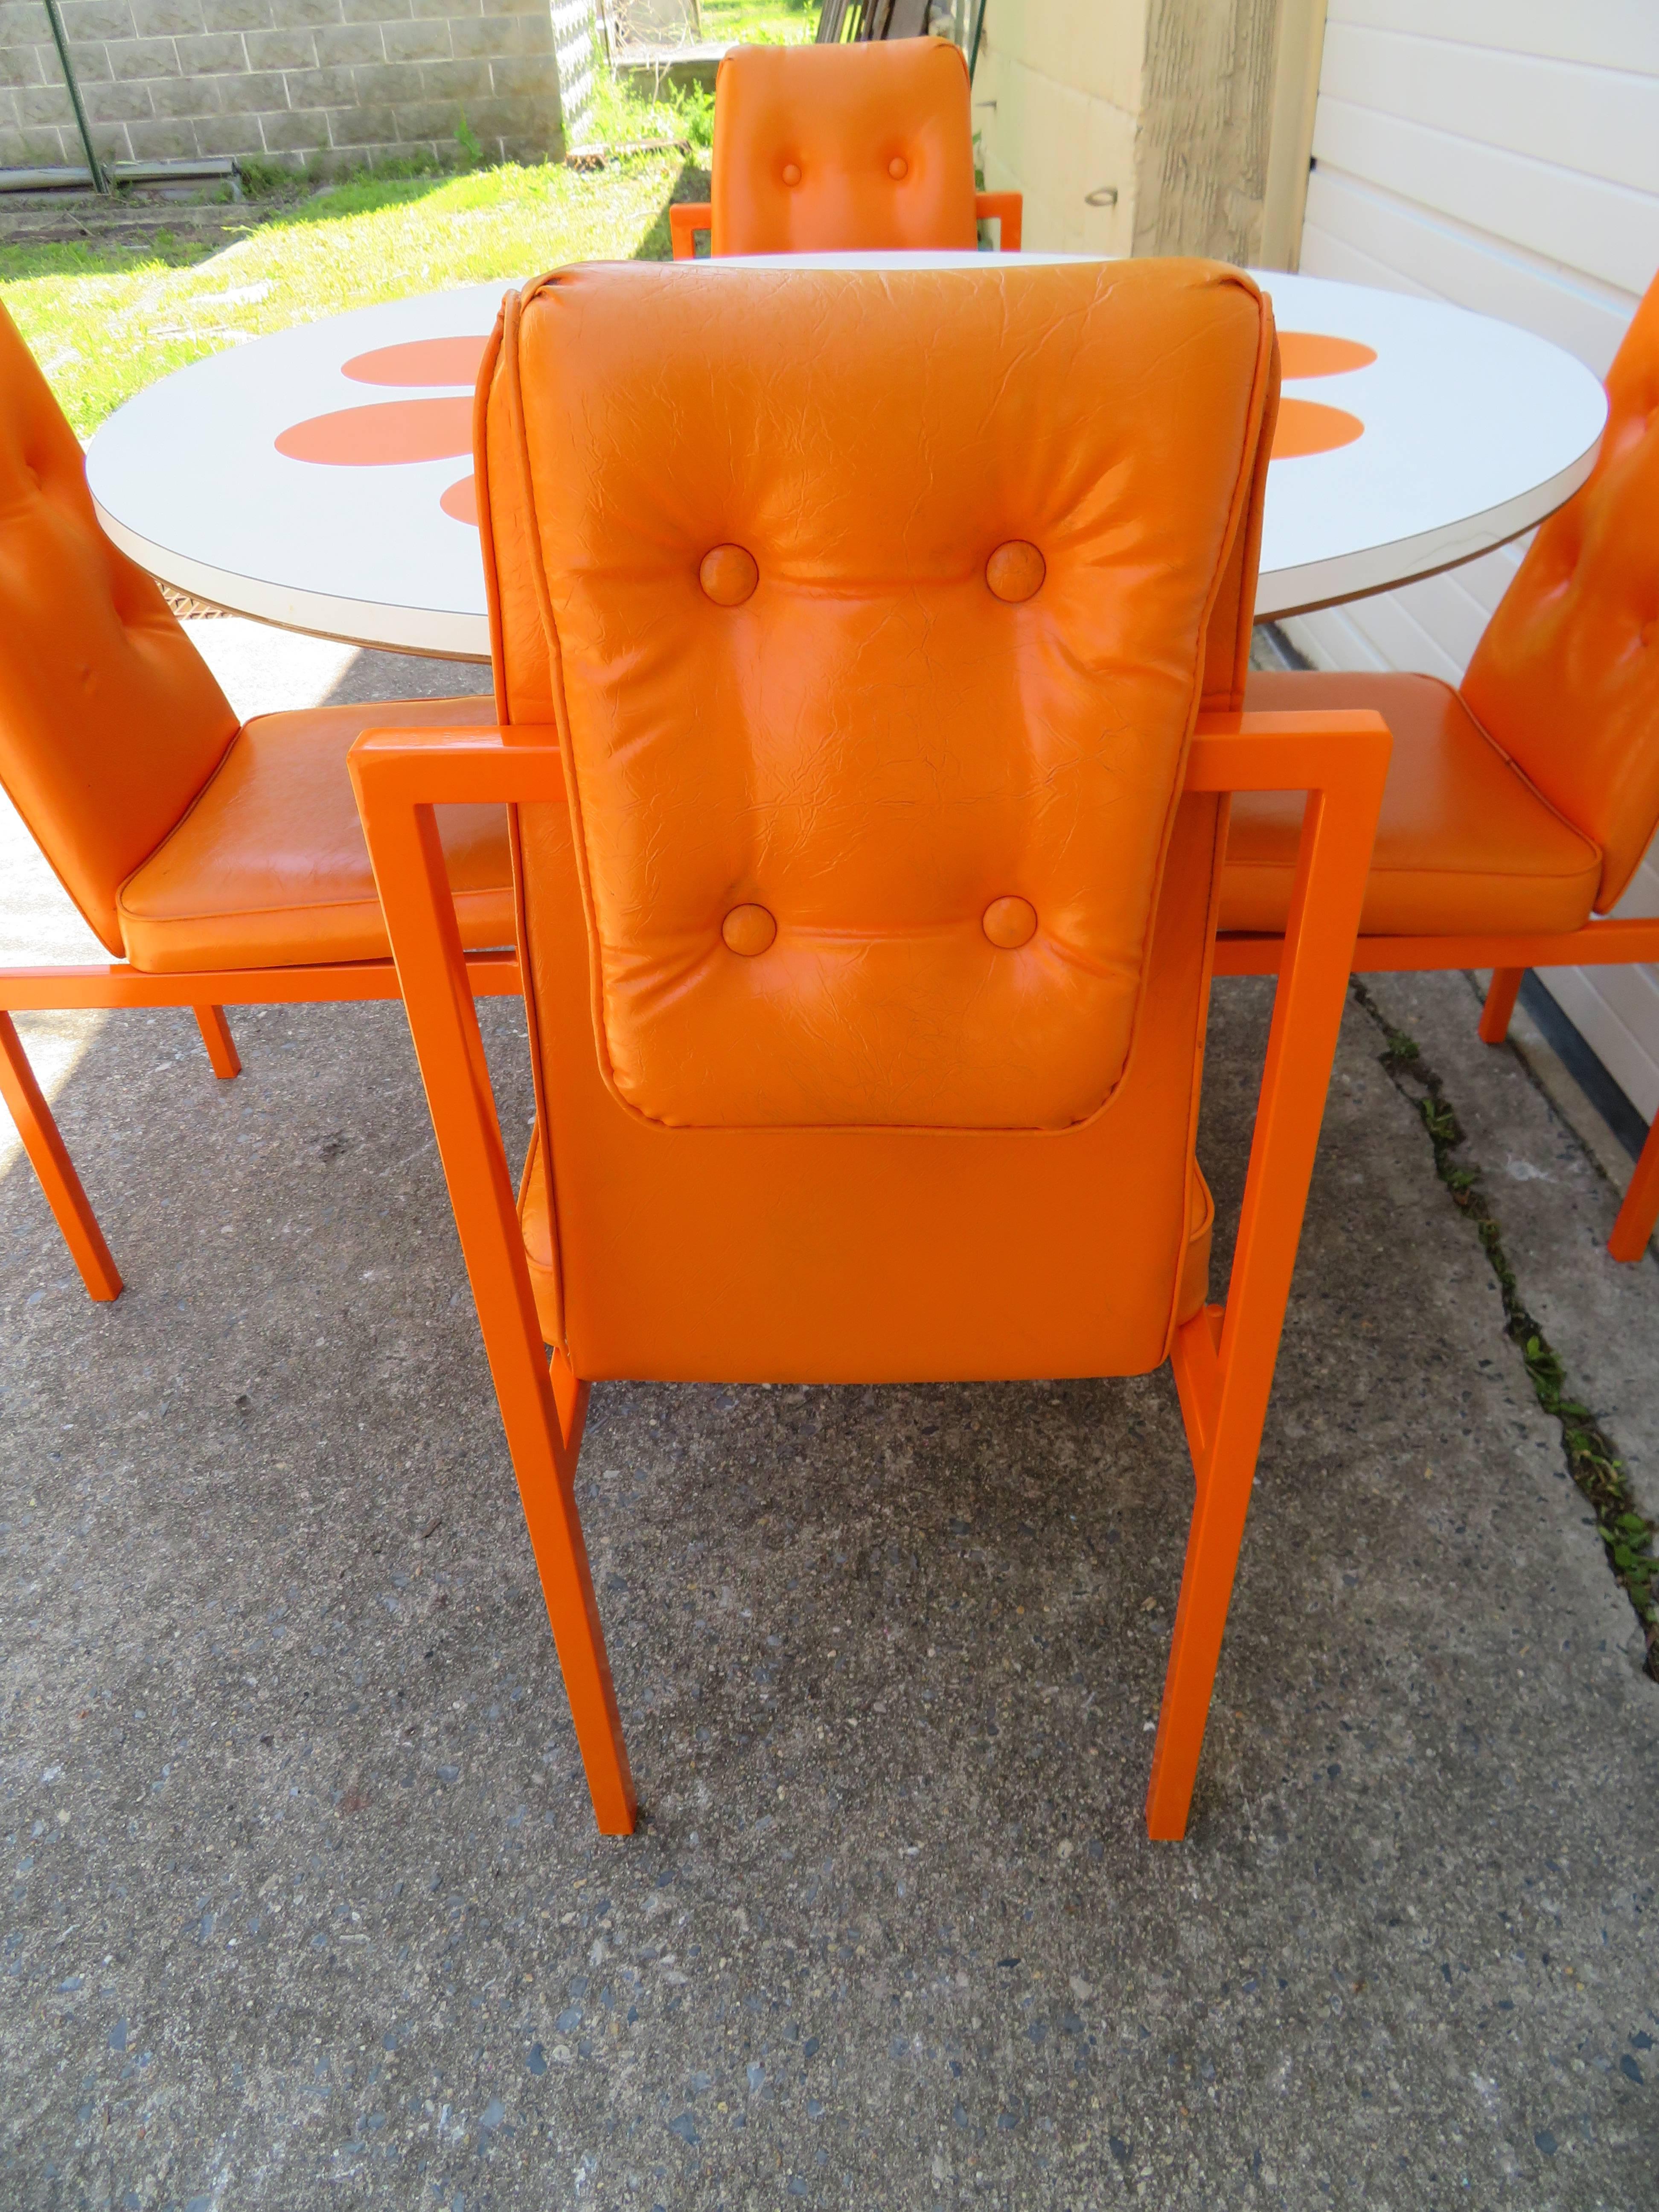 American Fun Orange Slice 1960s Dining Table Four Chairs Probber Style Mid-Century Modern For Sale